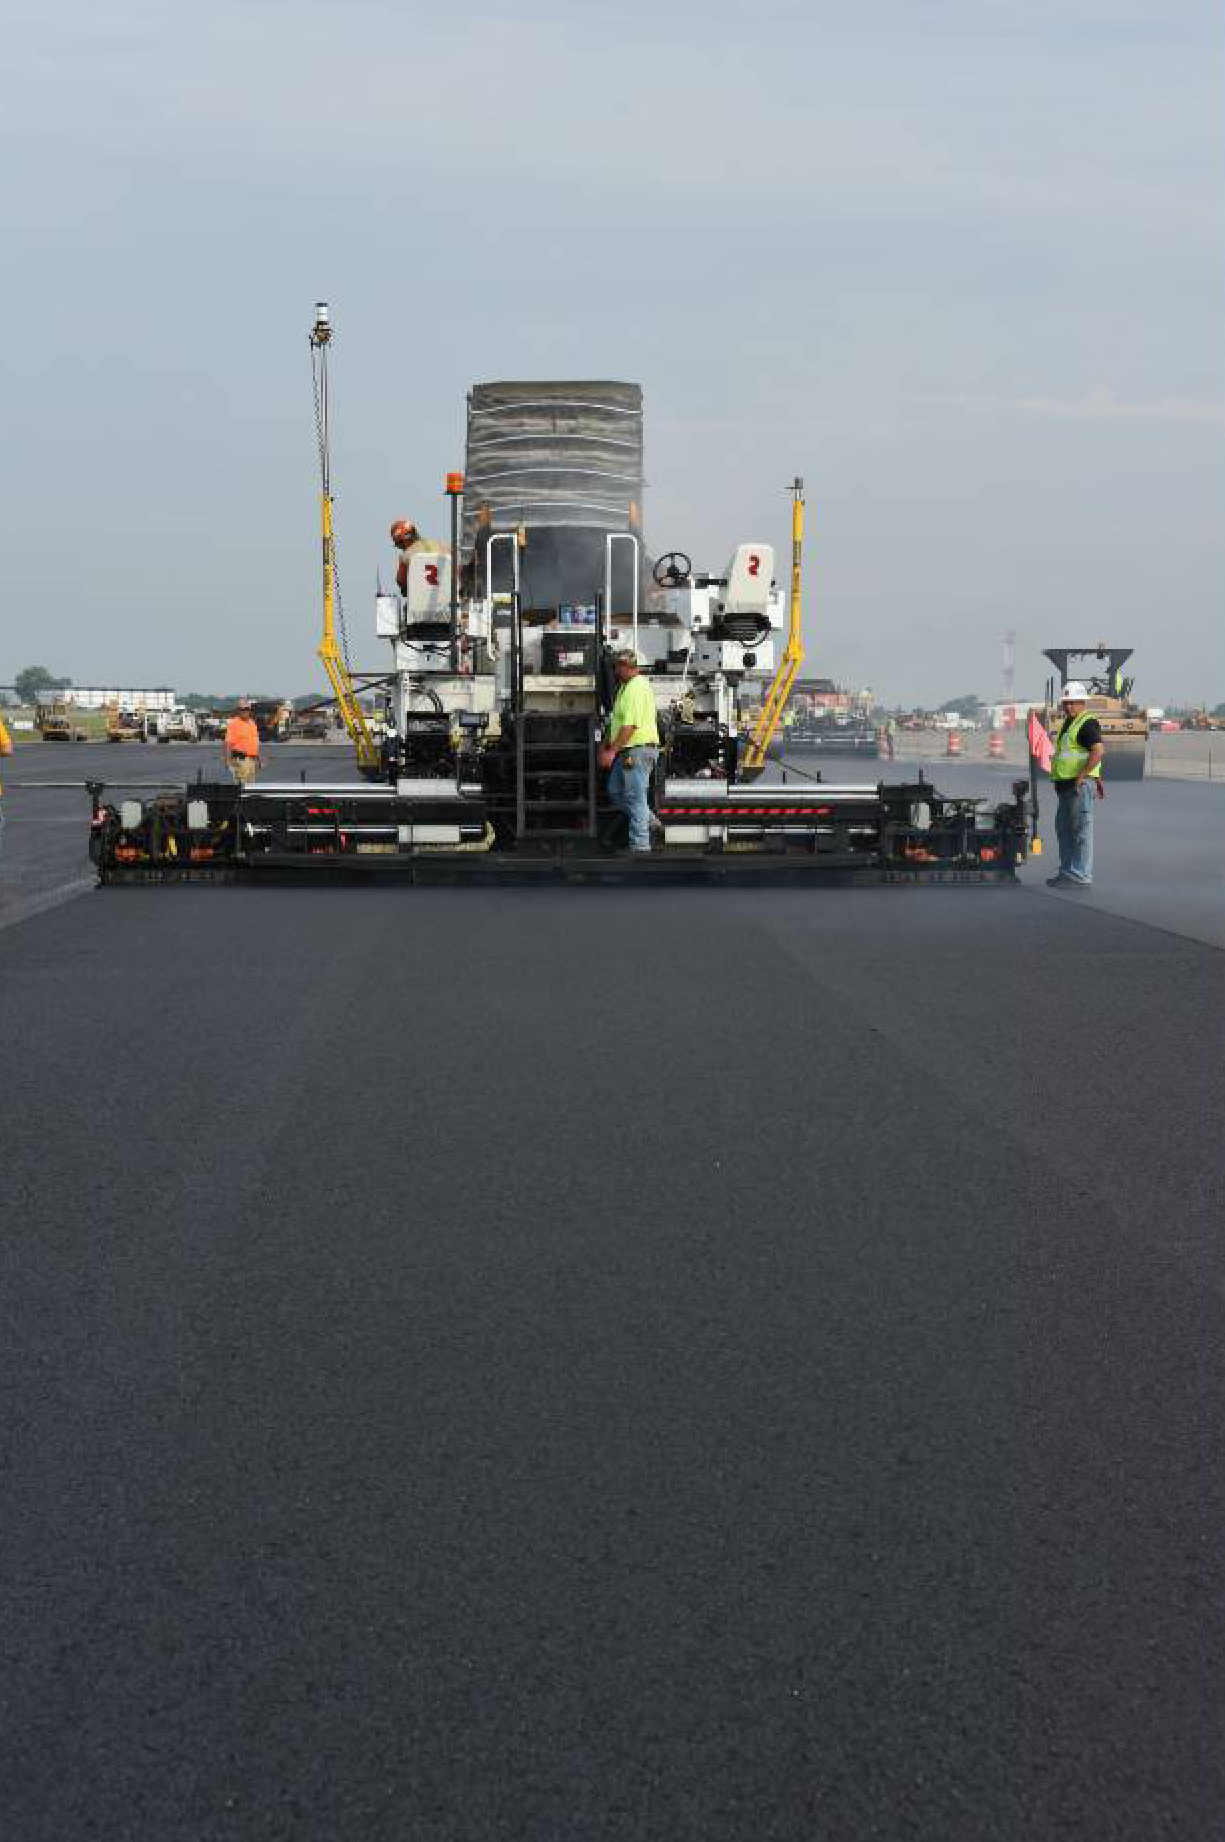 The Buffalo Niagara International Airport for the City of Buffalo, New York, received a new surface course for the entire runway, which measures 5,412 by 150 feet.